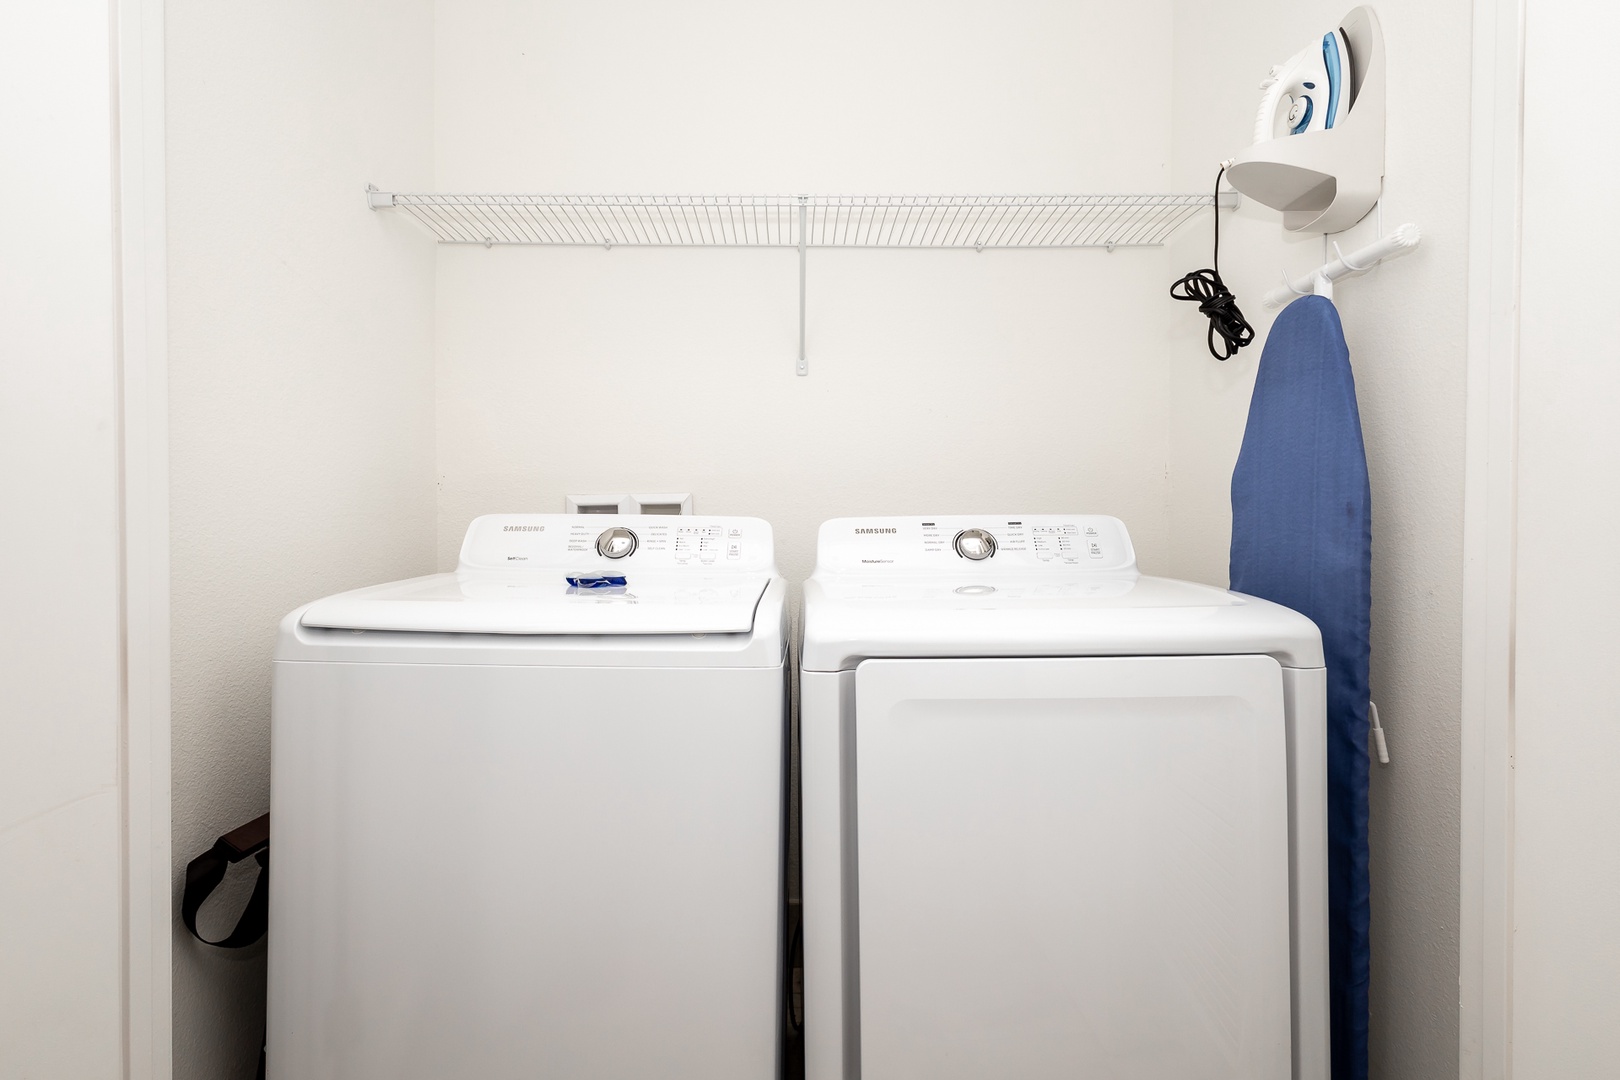 Private laundry is available for your stay, tucked away in the 2nd floor closet